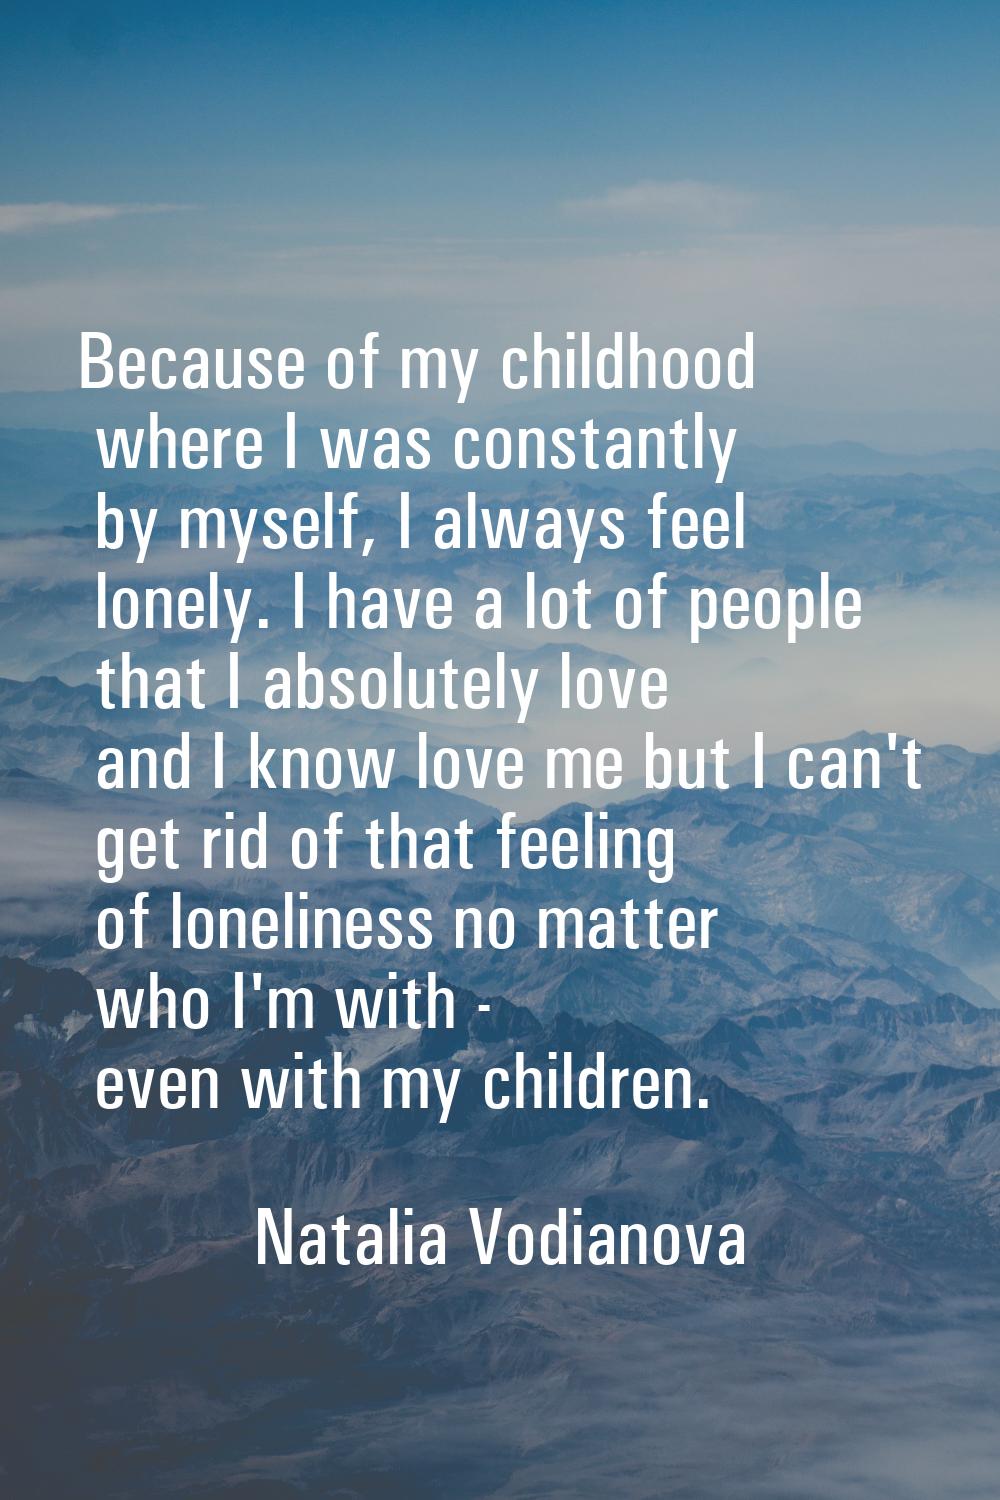 Because of my childhood where I was constantly by myself, I always feel lonely. I have a lot of peo